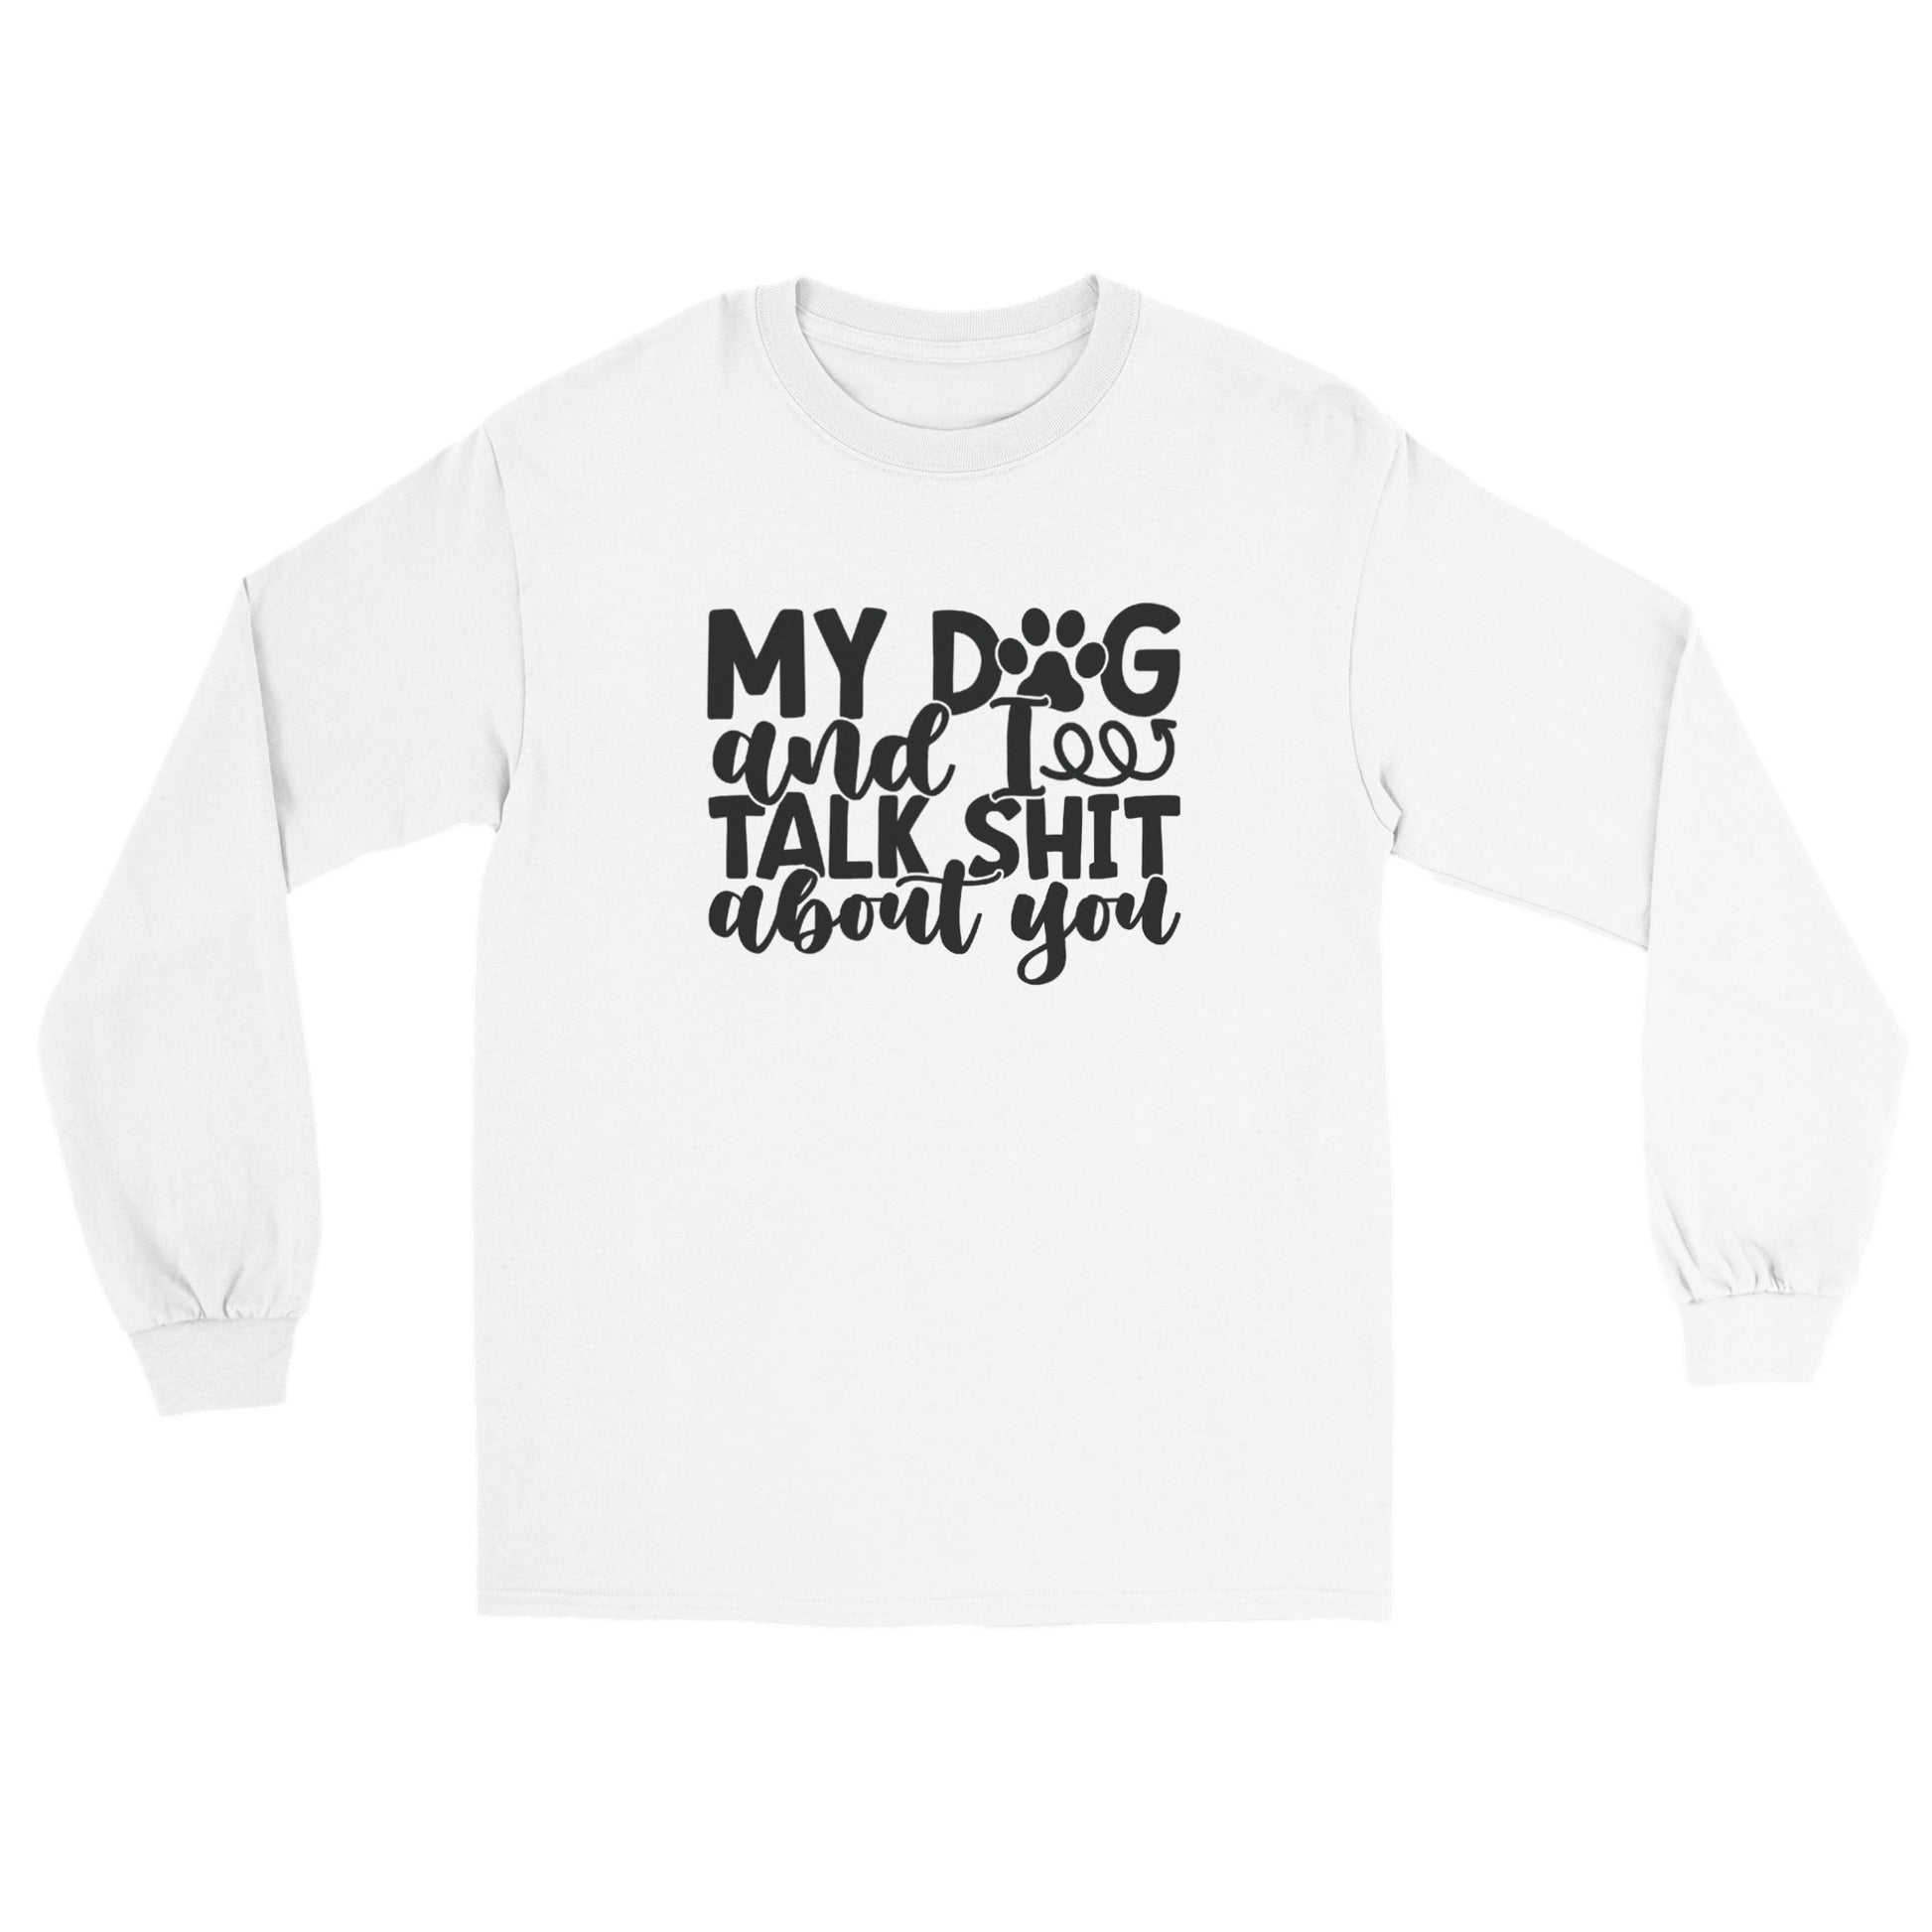 My Dog and I Talk Sh!t About You - Long sleeve T-shirt - Mister Snarky's